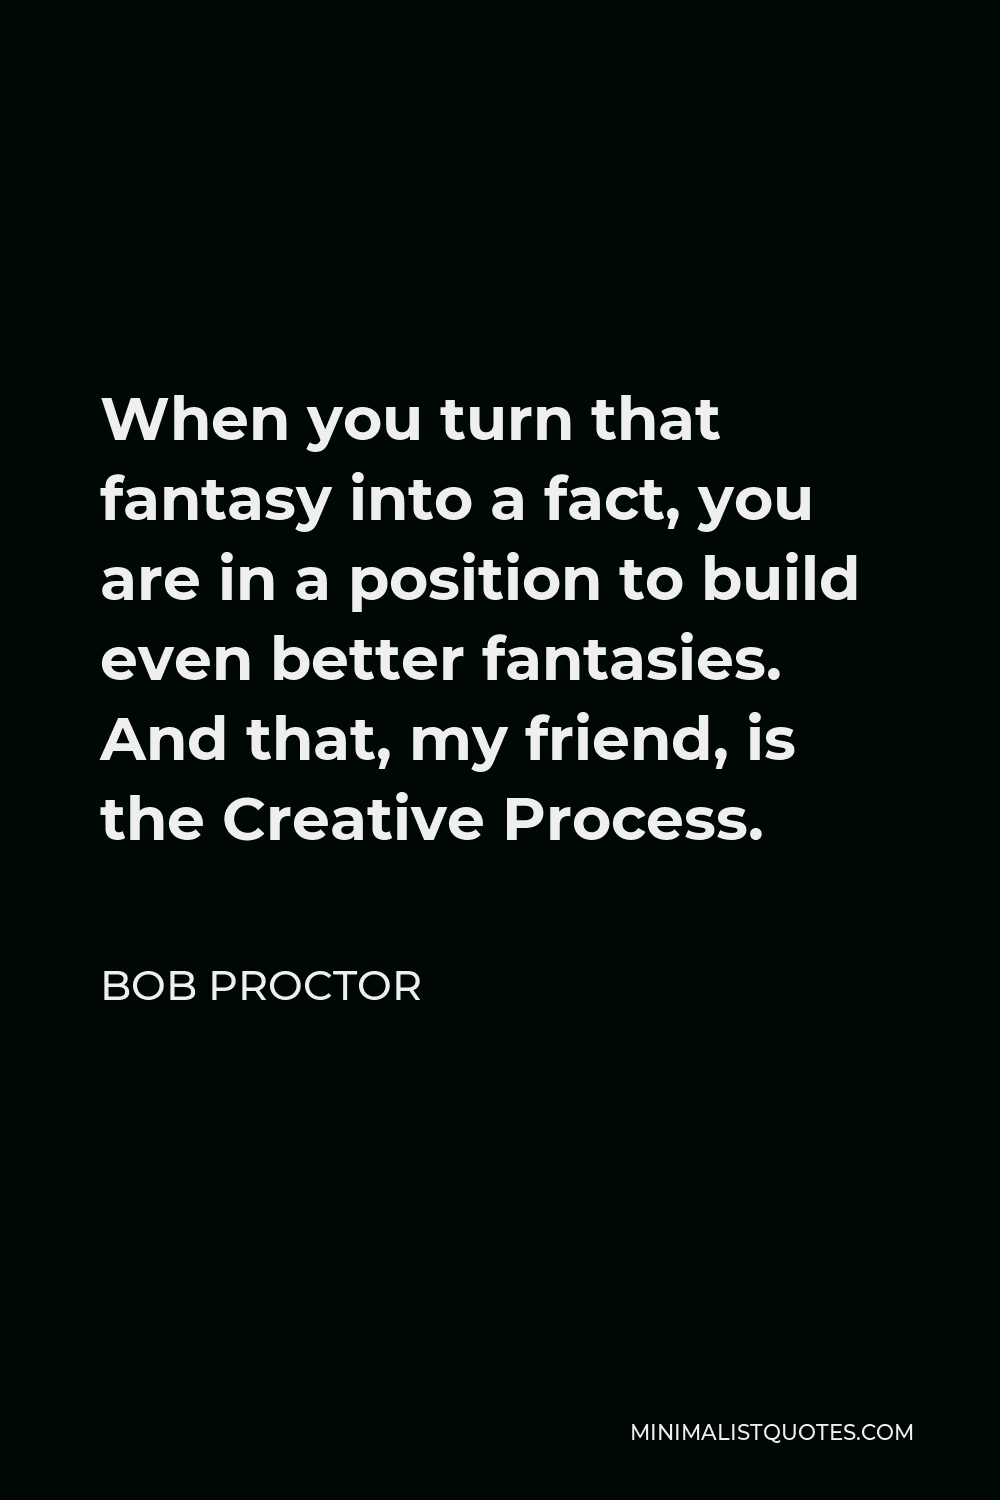 Bob Proctor Quote - When you turn that fantasy into a fact, you are in a position to build even better fantasies. And that, my friend, is the Creative Process.